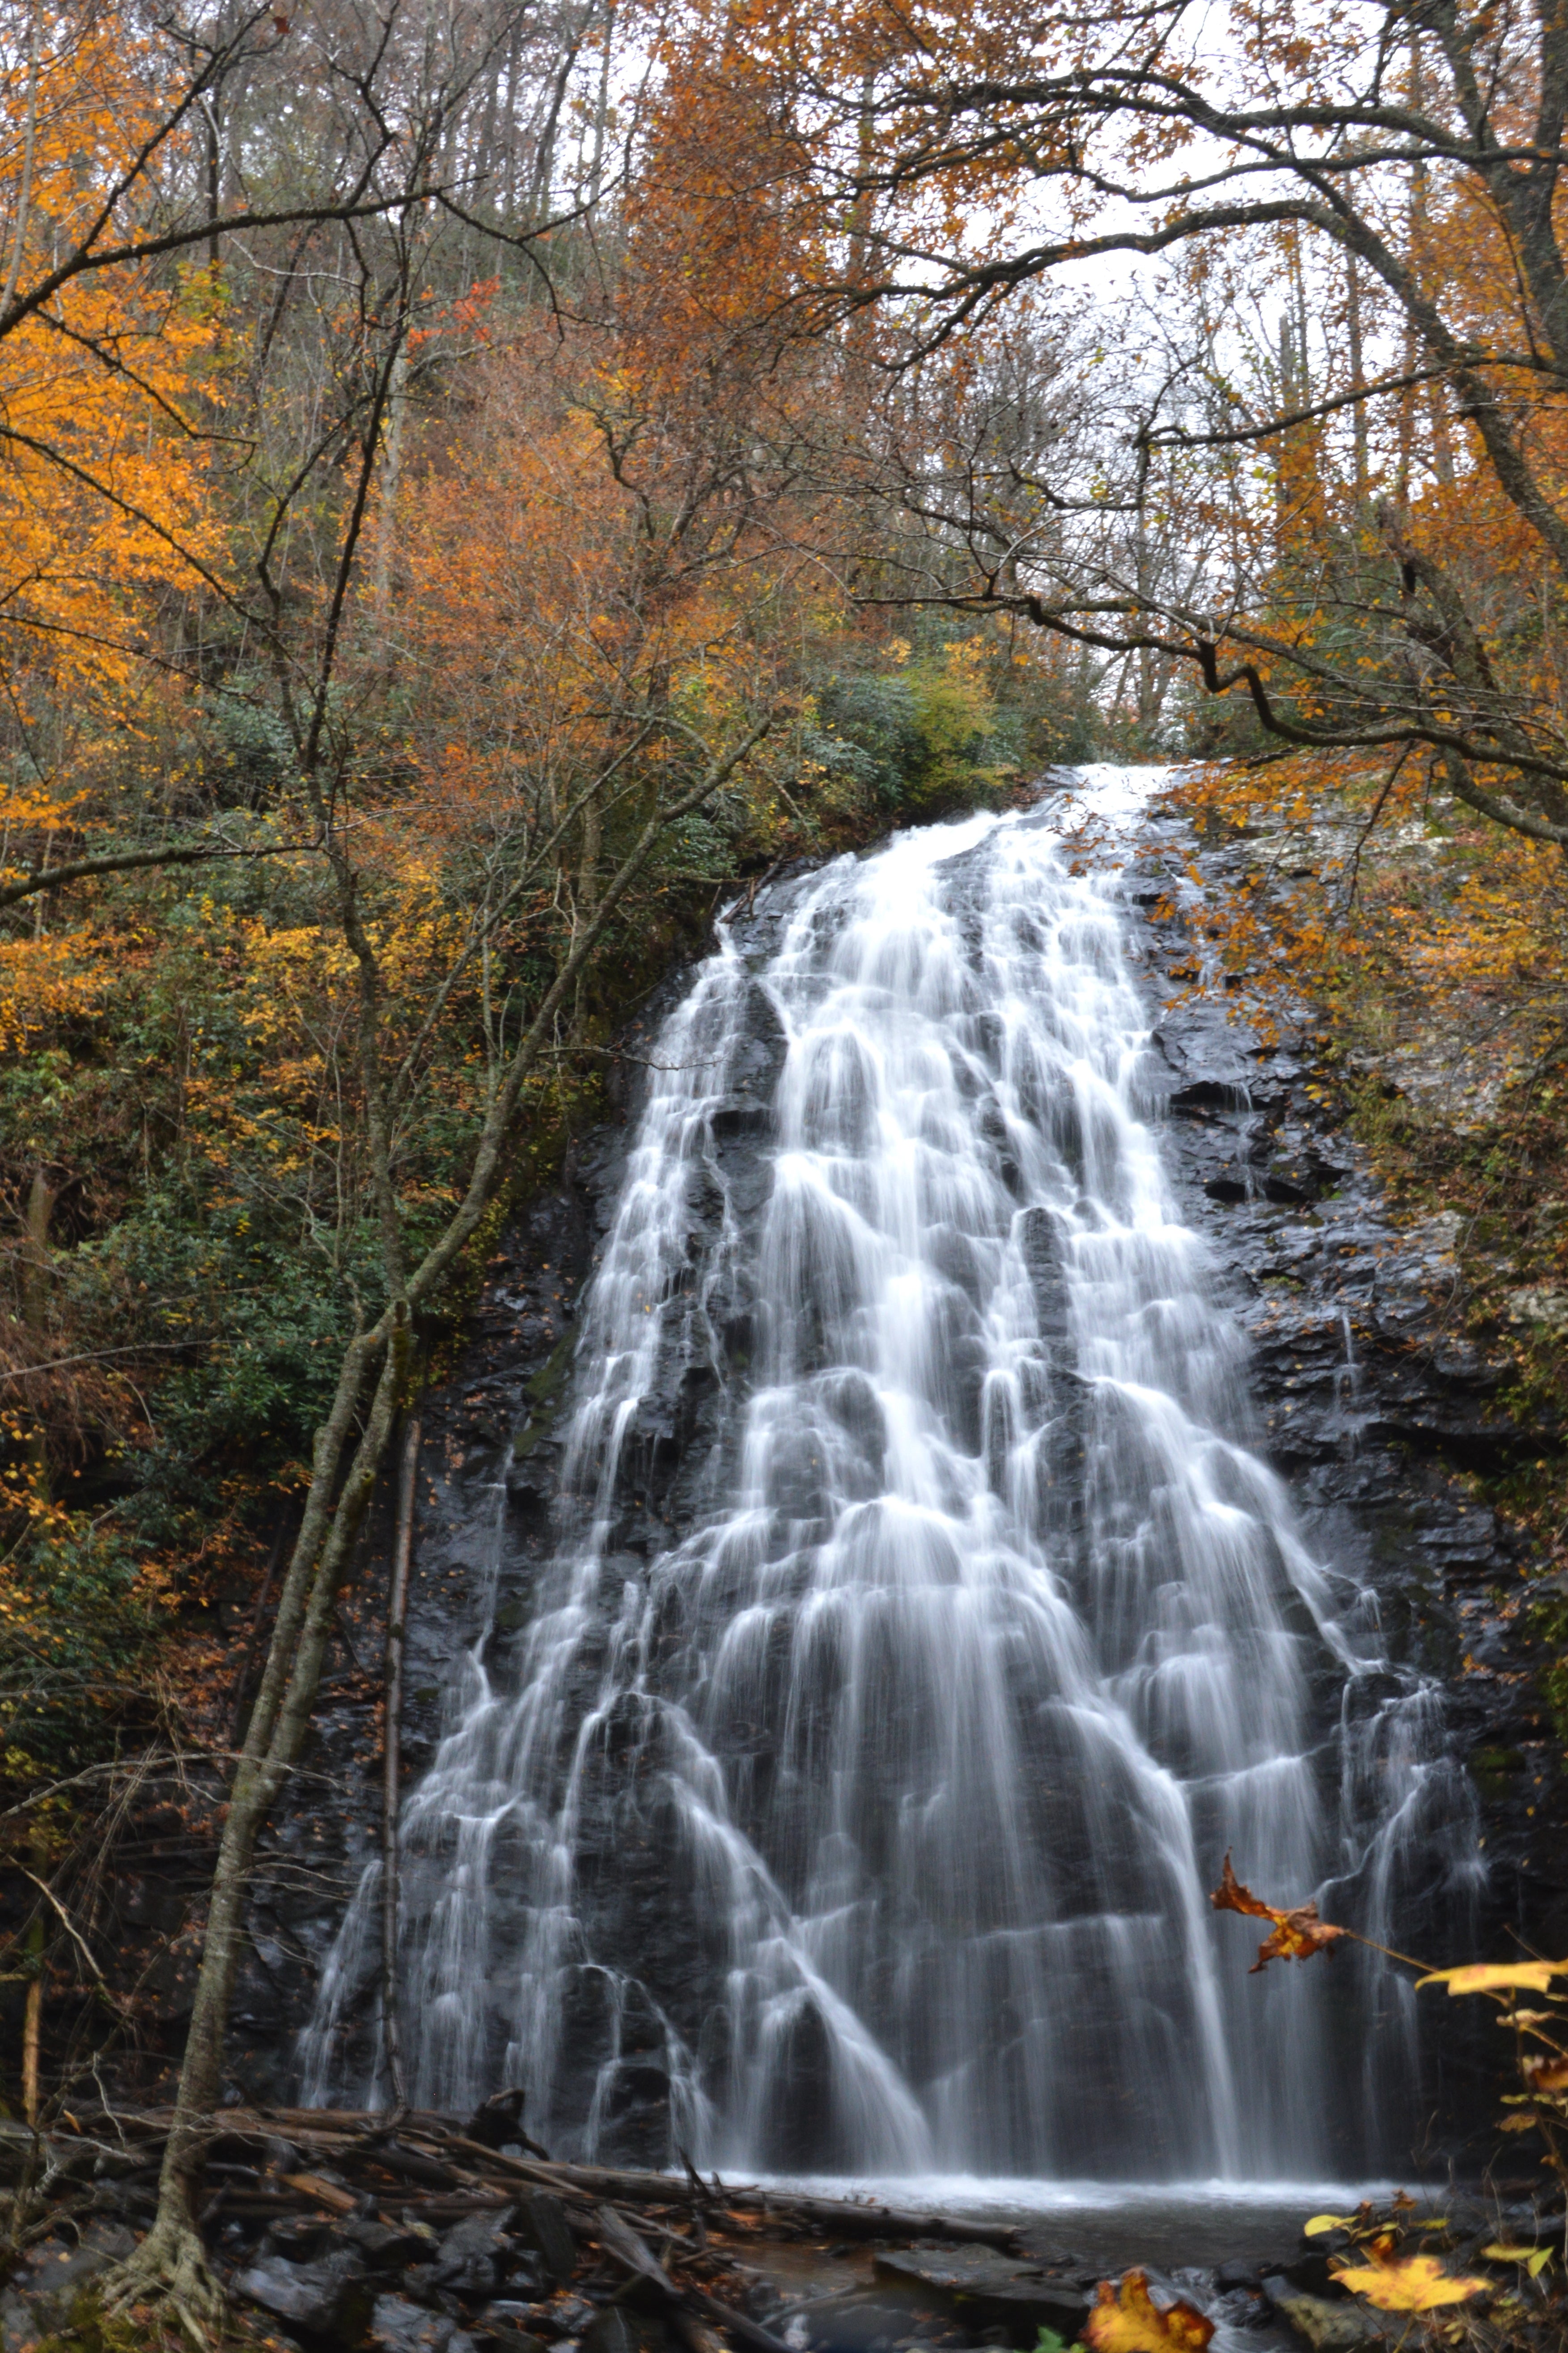 The falls were stunning with fall color